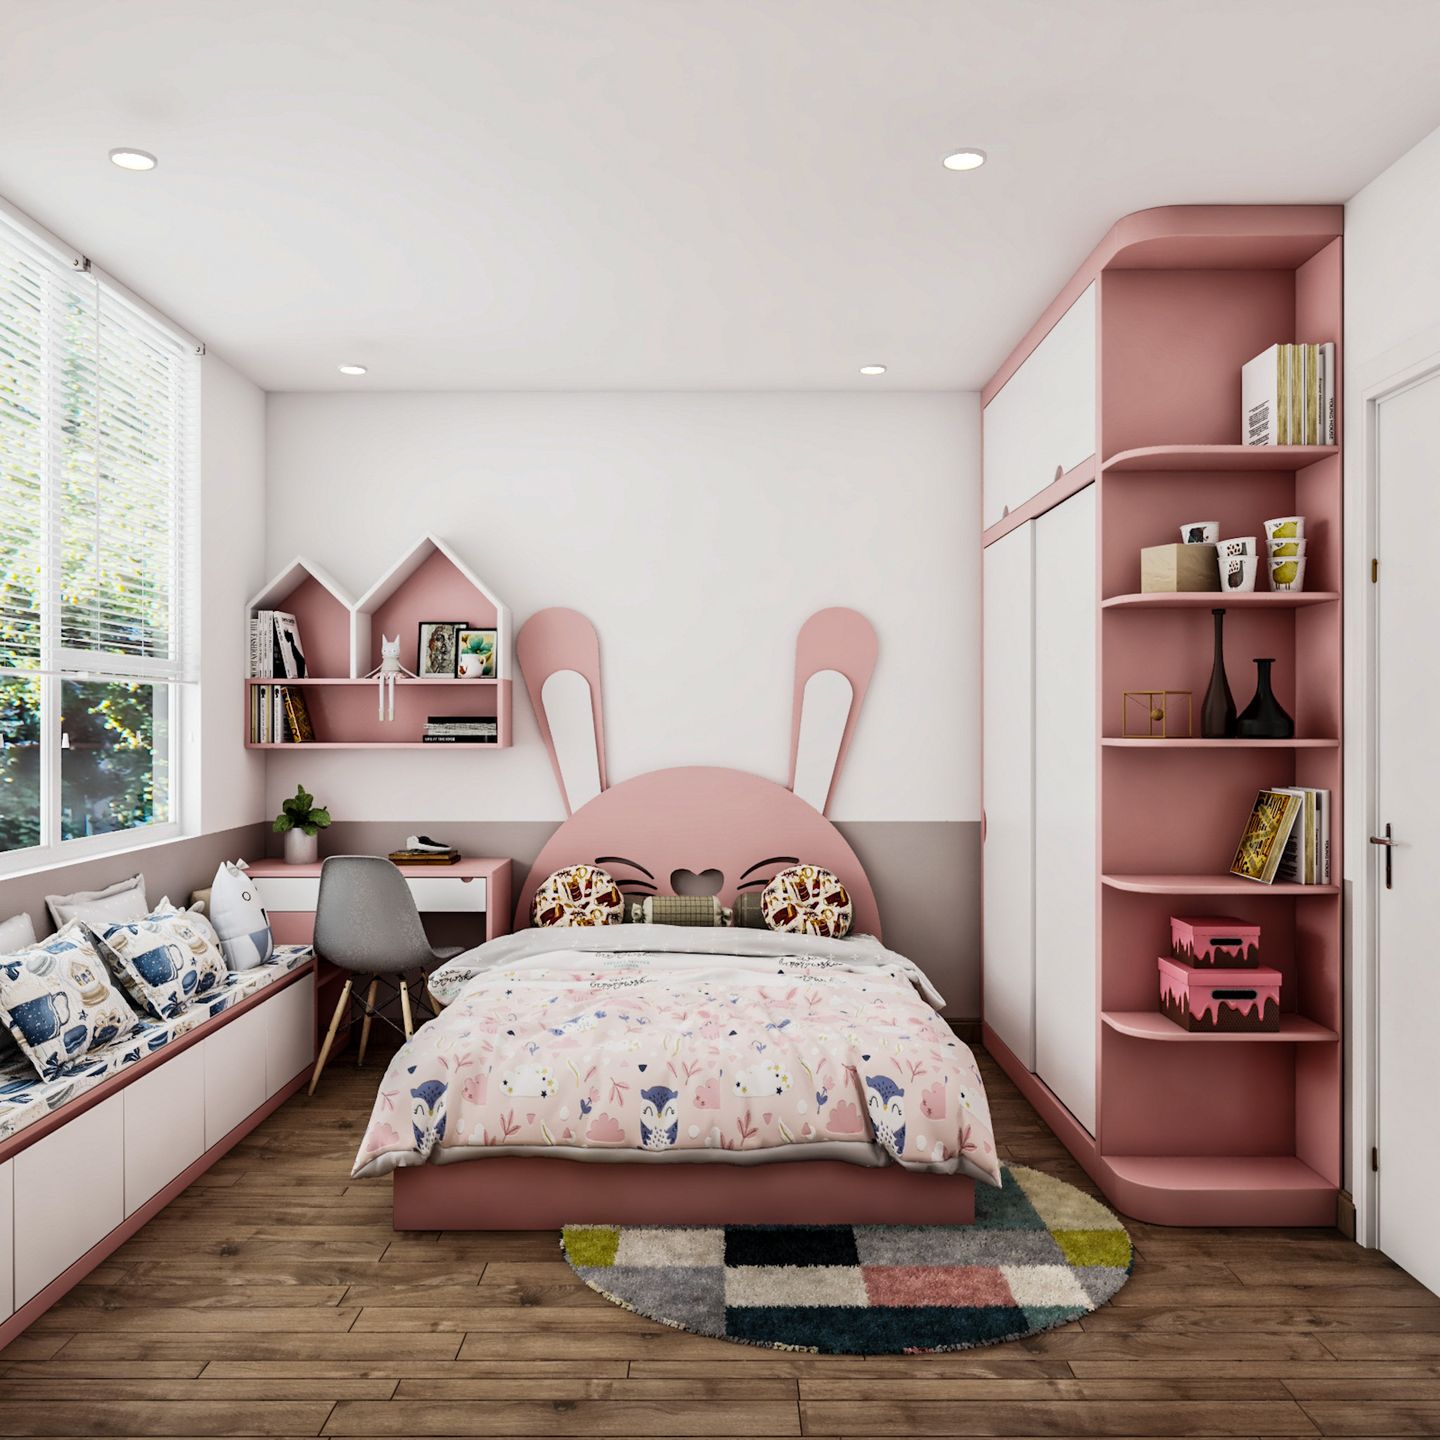 Modern Kid's Bedroom With A Study Table - Livspace